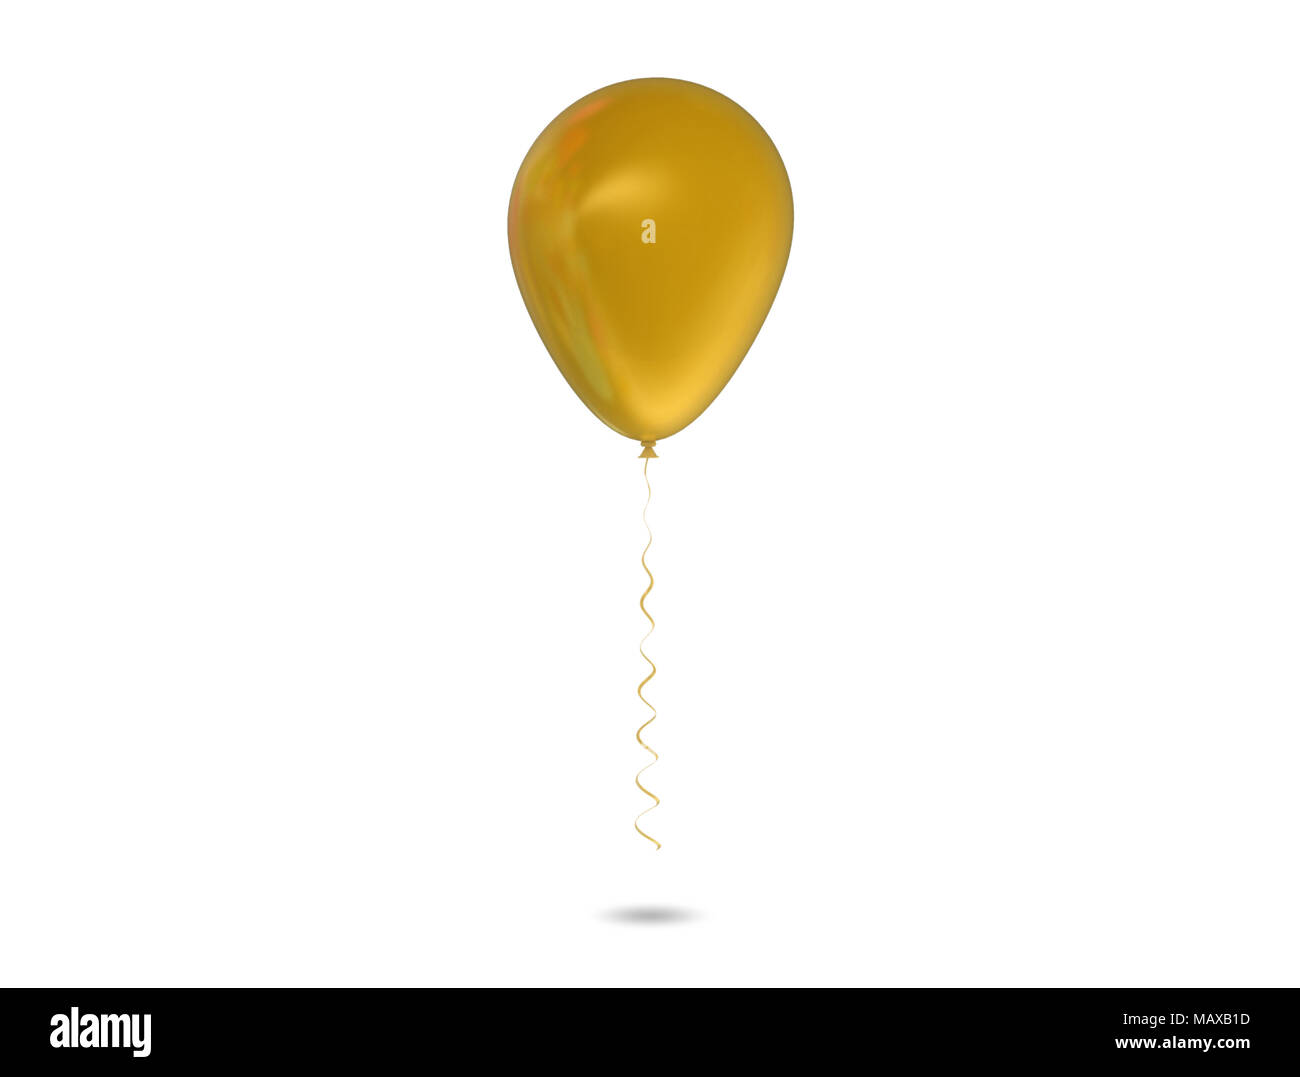 Yellow balloon flying isolated over white background Stock Photo